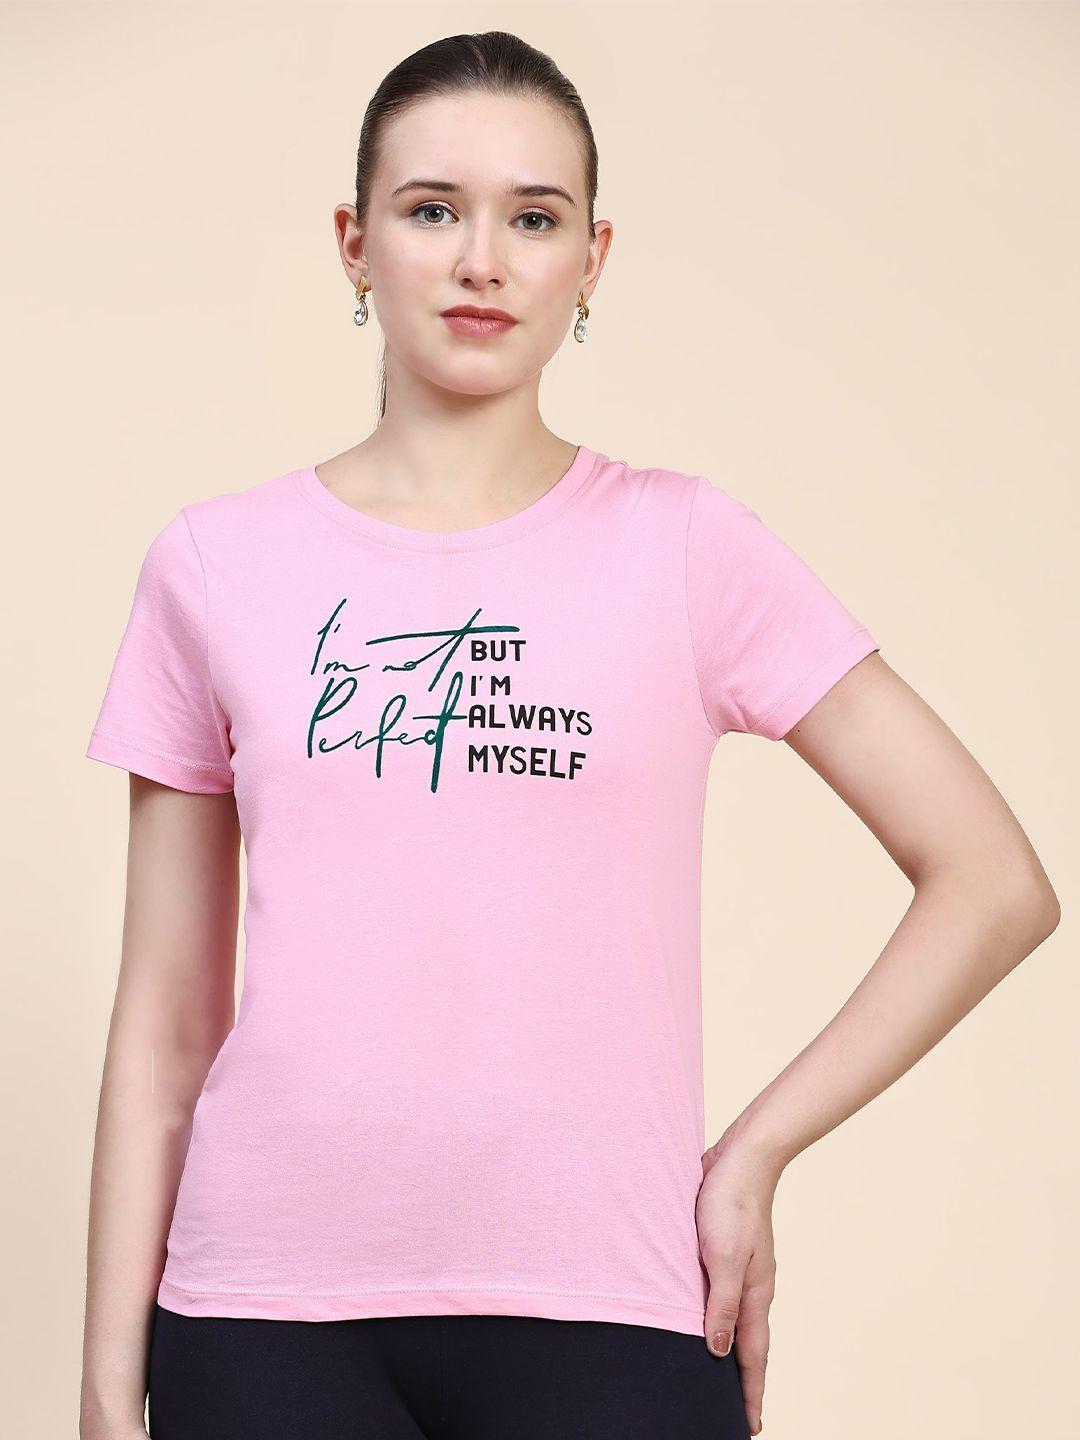 outflits-women-pink-typography-printed-applique-t-shirt